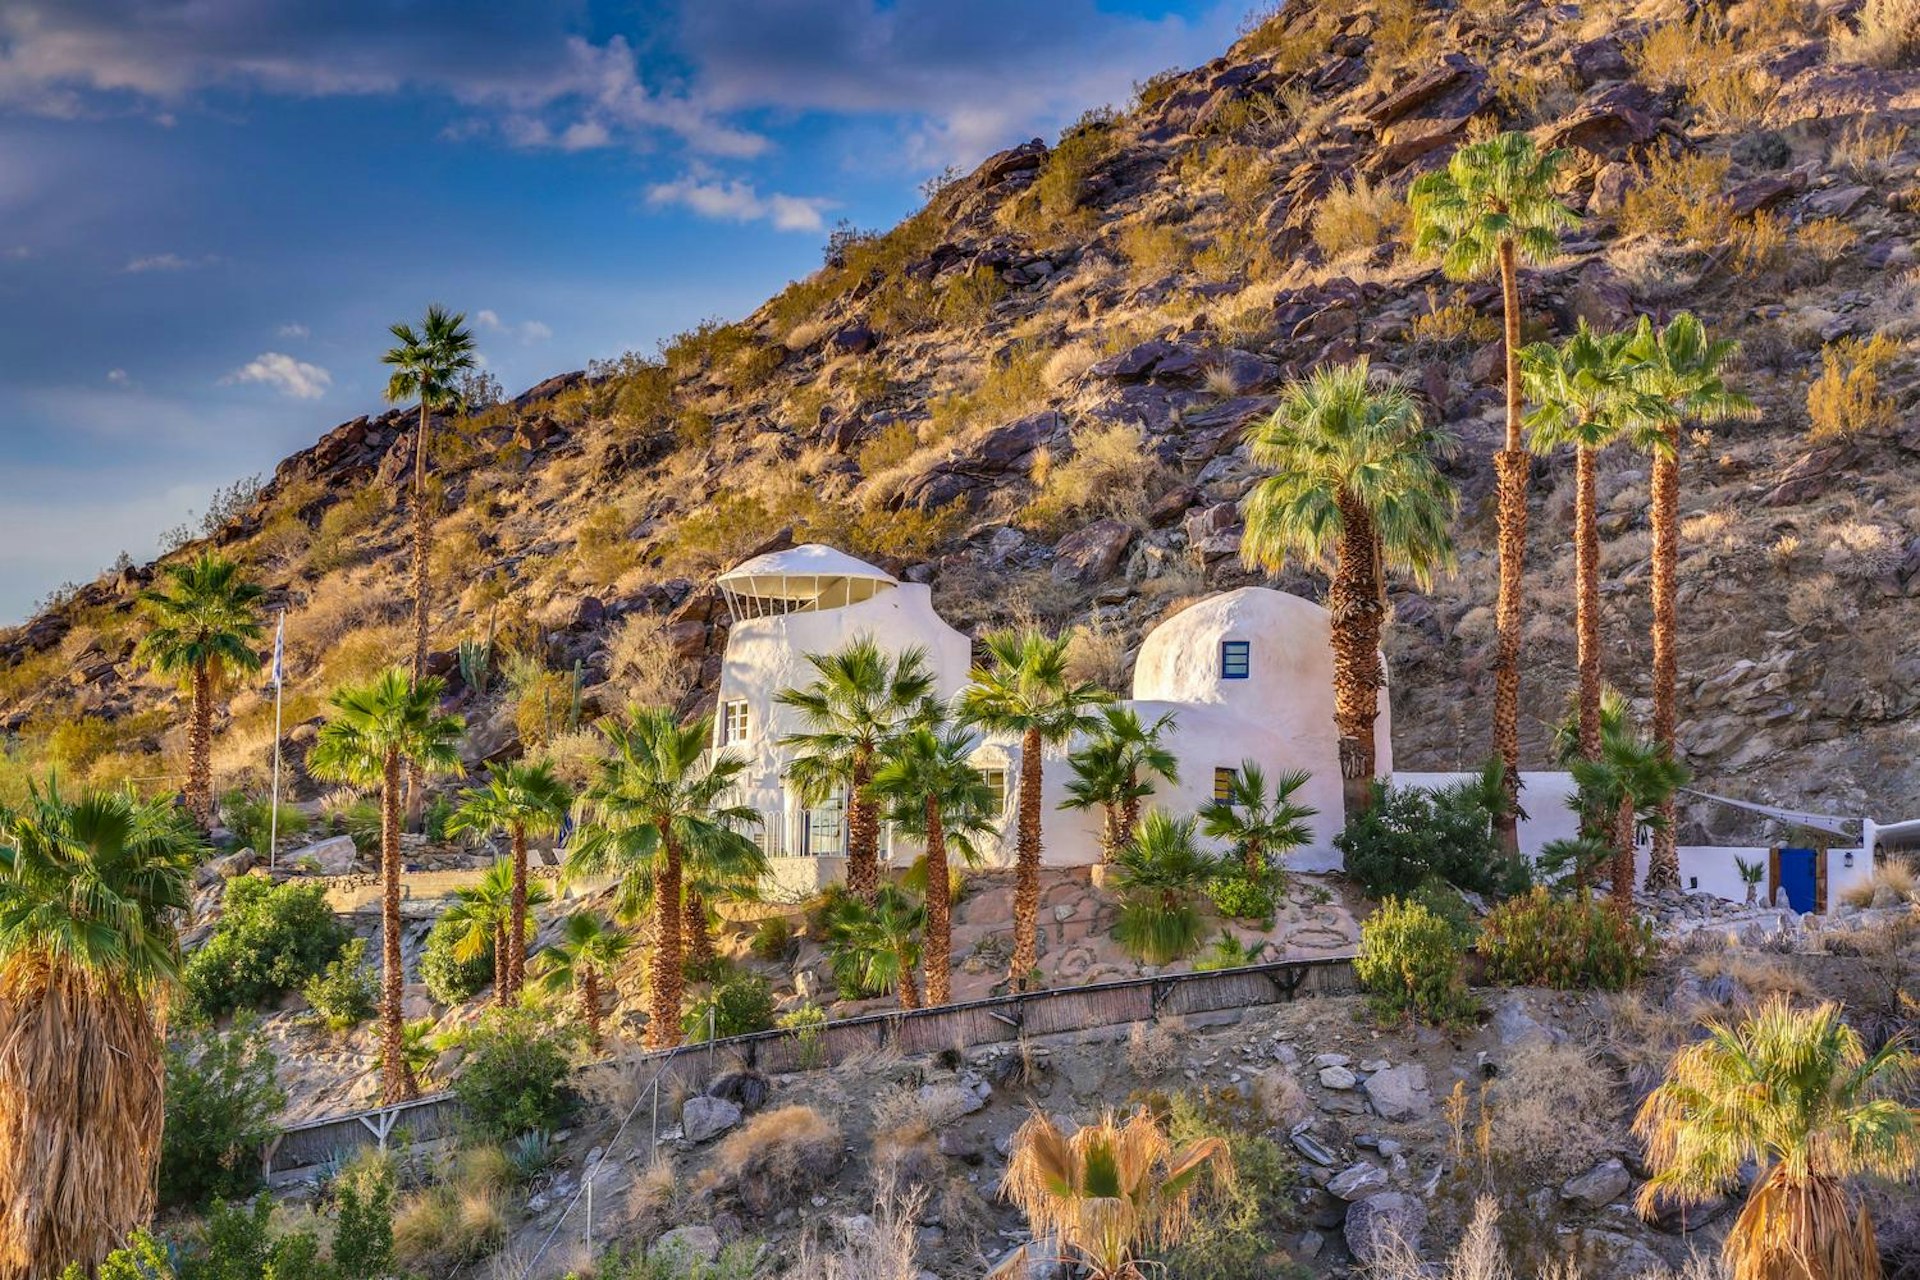 400 W Camino Alturas in the hills of Palm Springs